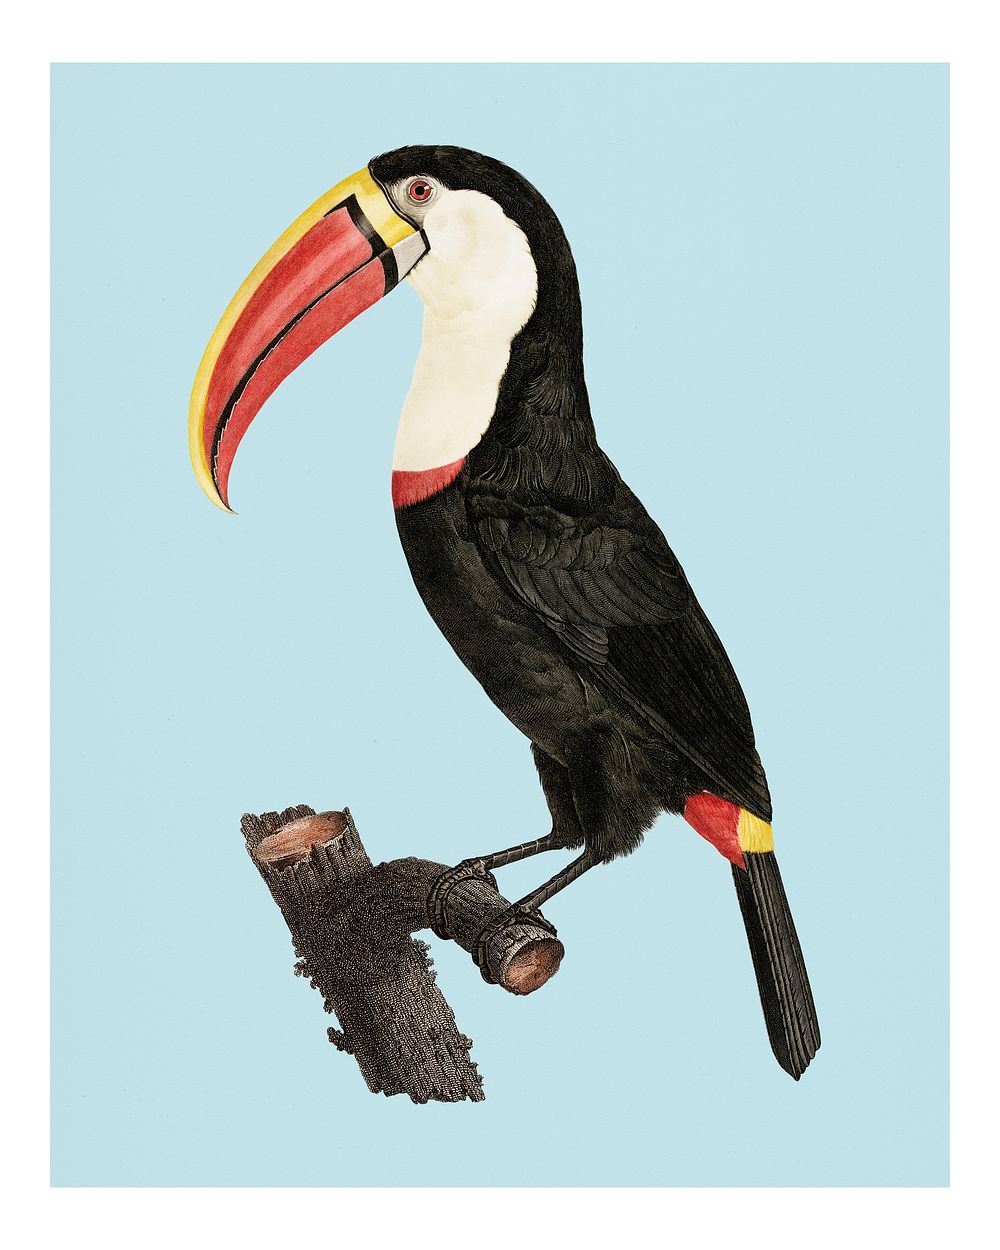 Vintage Toucan illustration wall art print and poster.